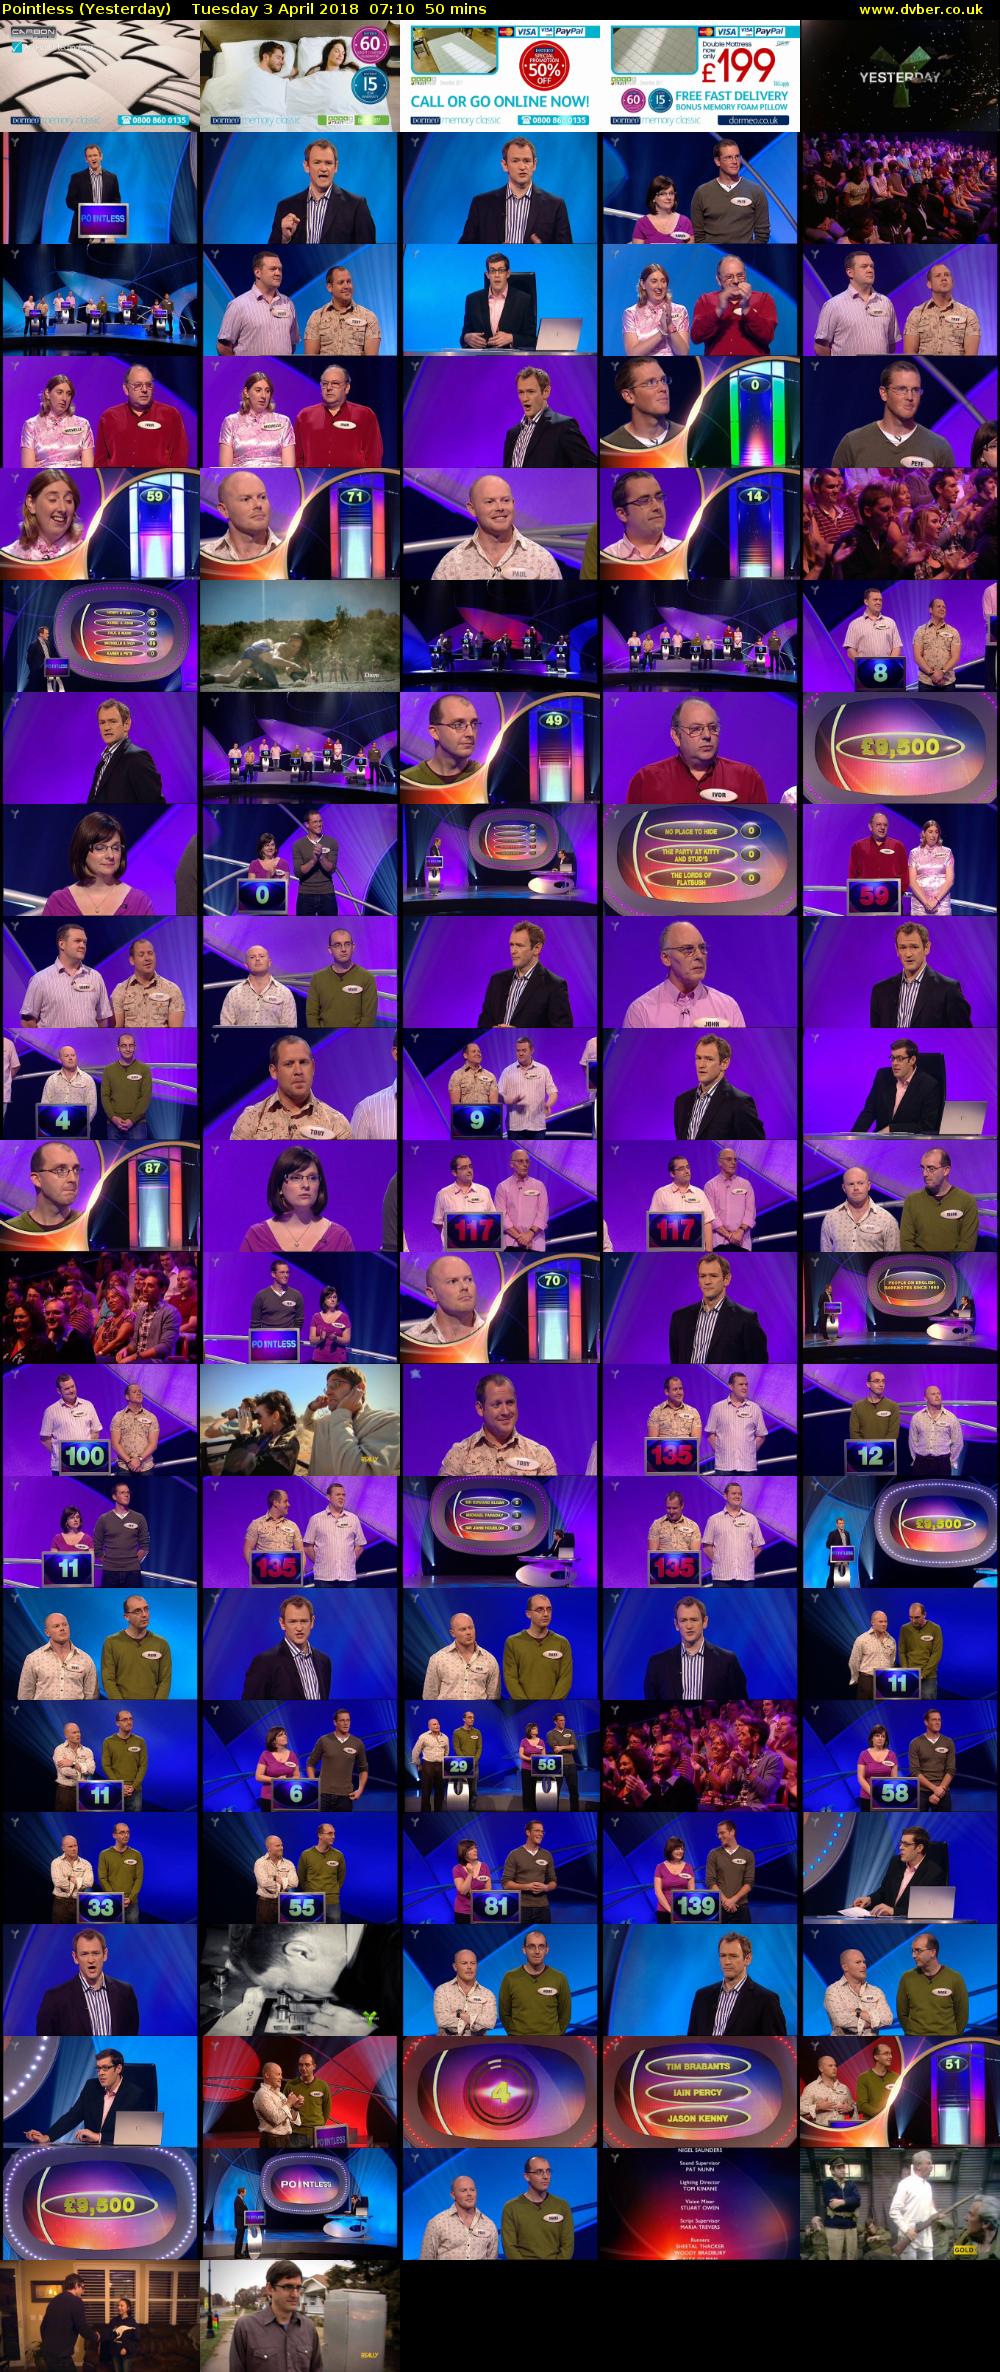 Pointless (Yesterday) Tuesday 3 April 2018 07:10 - 08:00